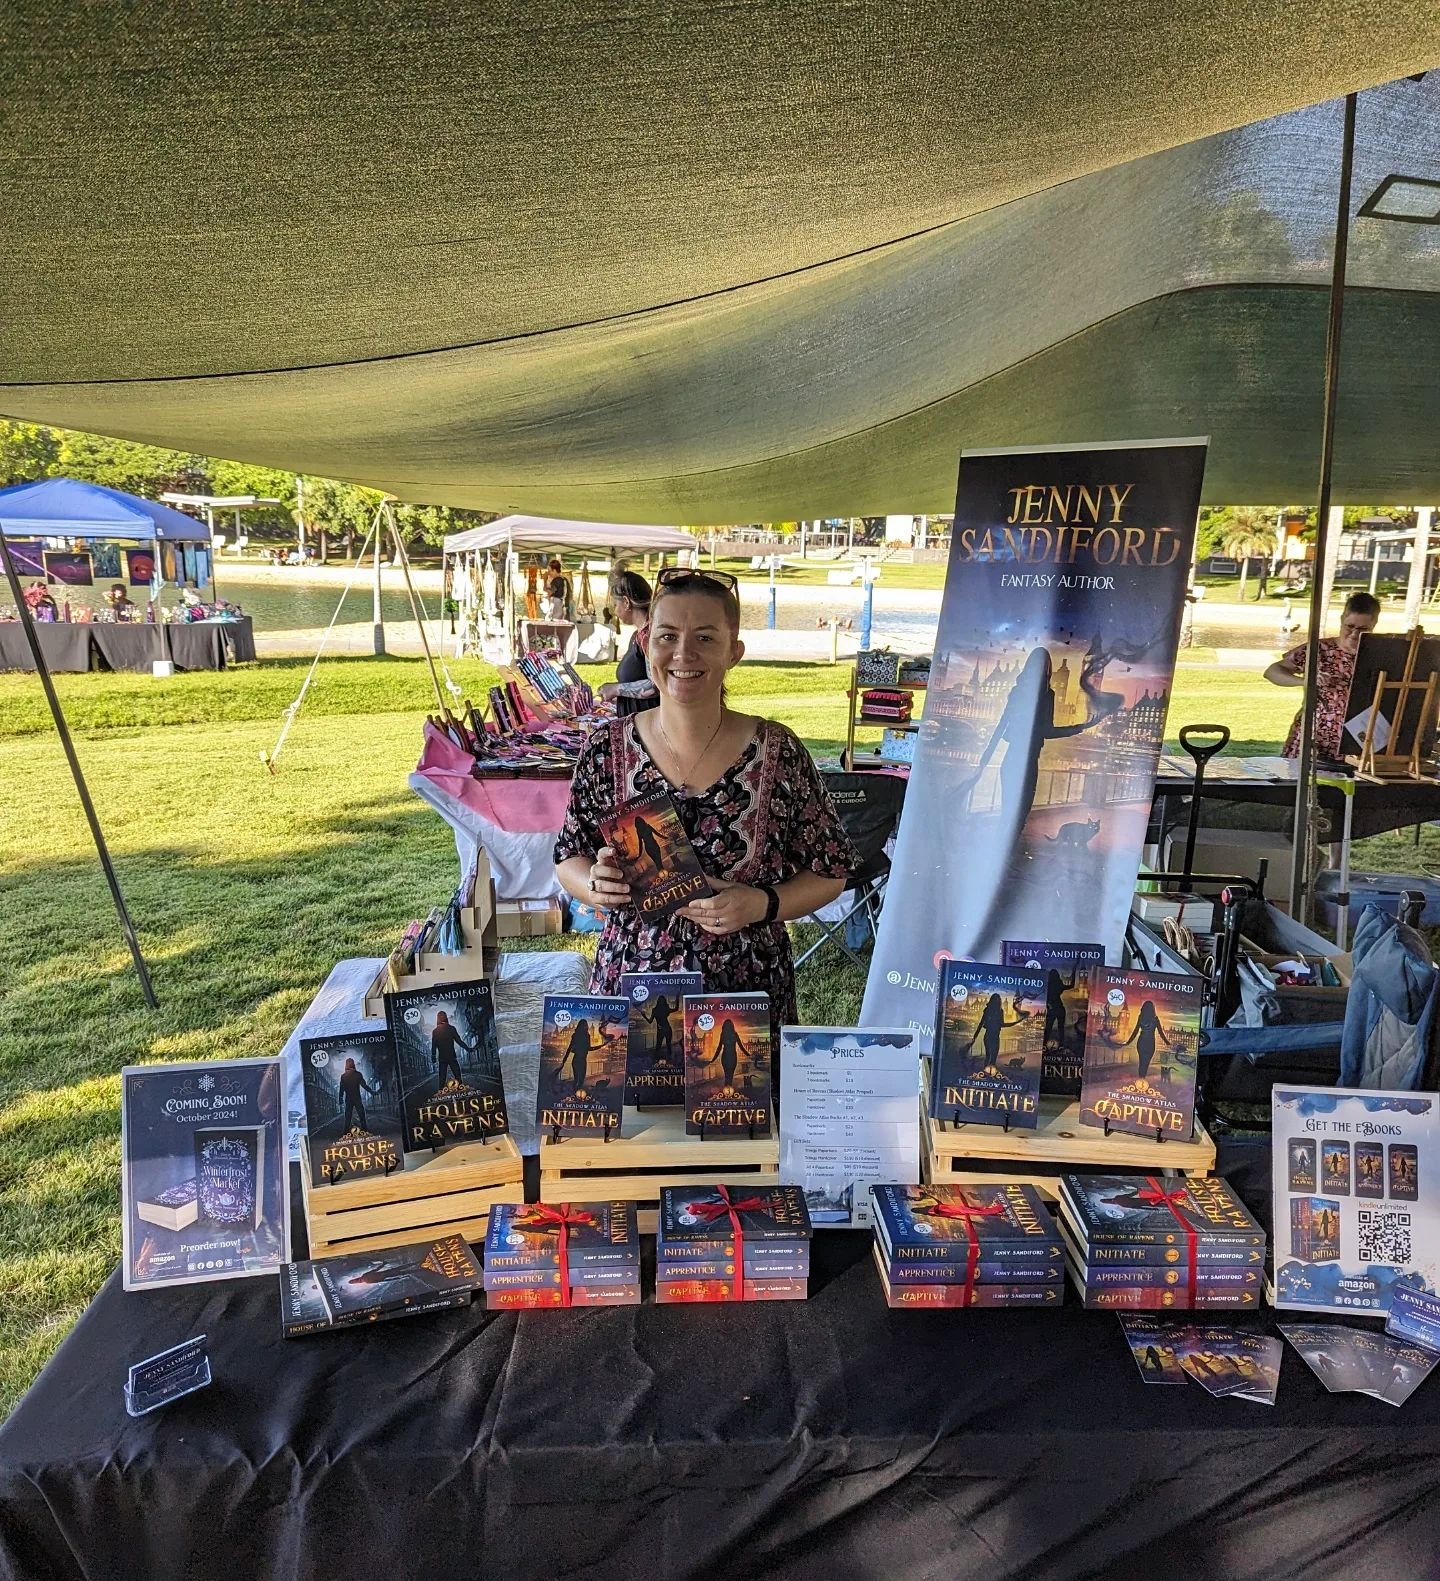 🌴🛍️We had a lovely day at the Tactile Arts Mother's day market on Sunday. 

Thank you to all my helpers! As well as any of the lovely people who bought a book or popped down to say hello! 

#tactilearts
#marketday #darwinmarket #darwinaustralia #wr